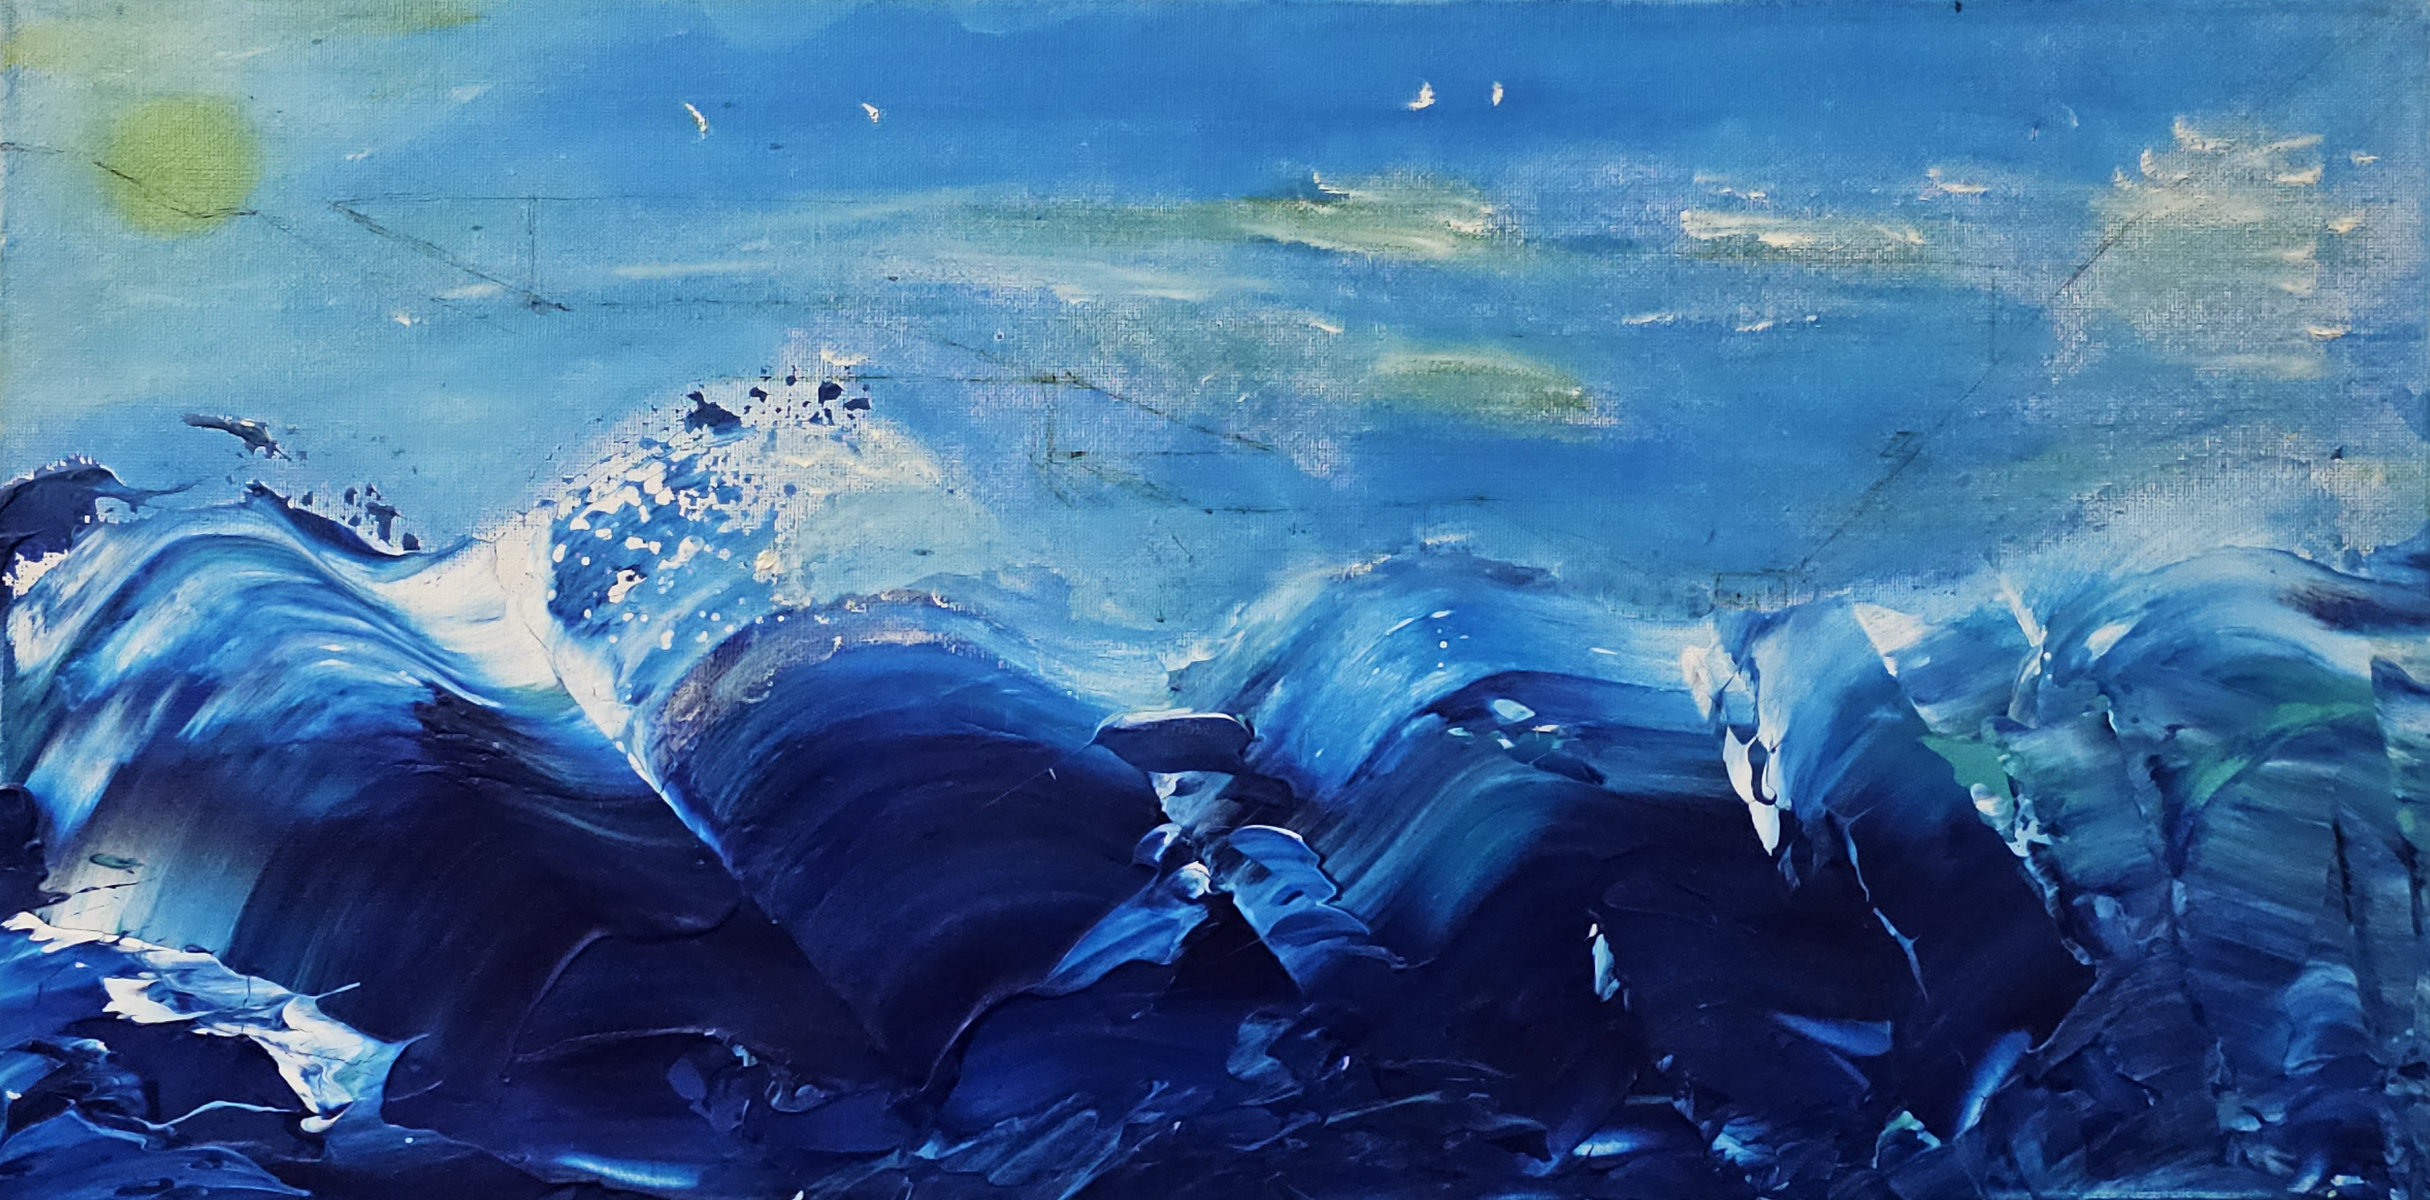 A heavily stylized painting of waves and a sun rendered with heavy palette knife application of white and blue